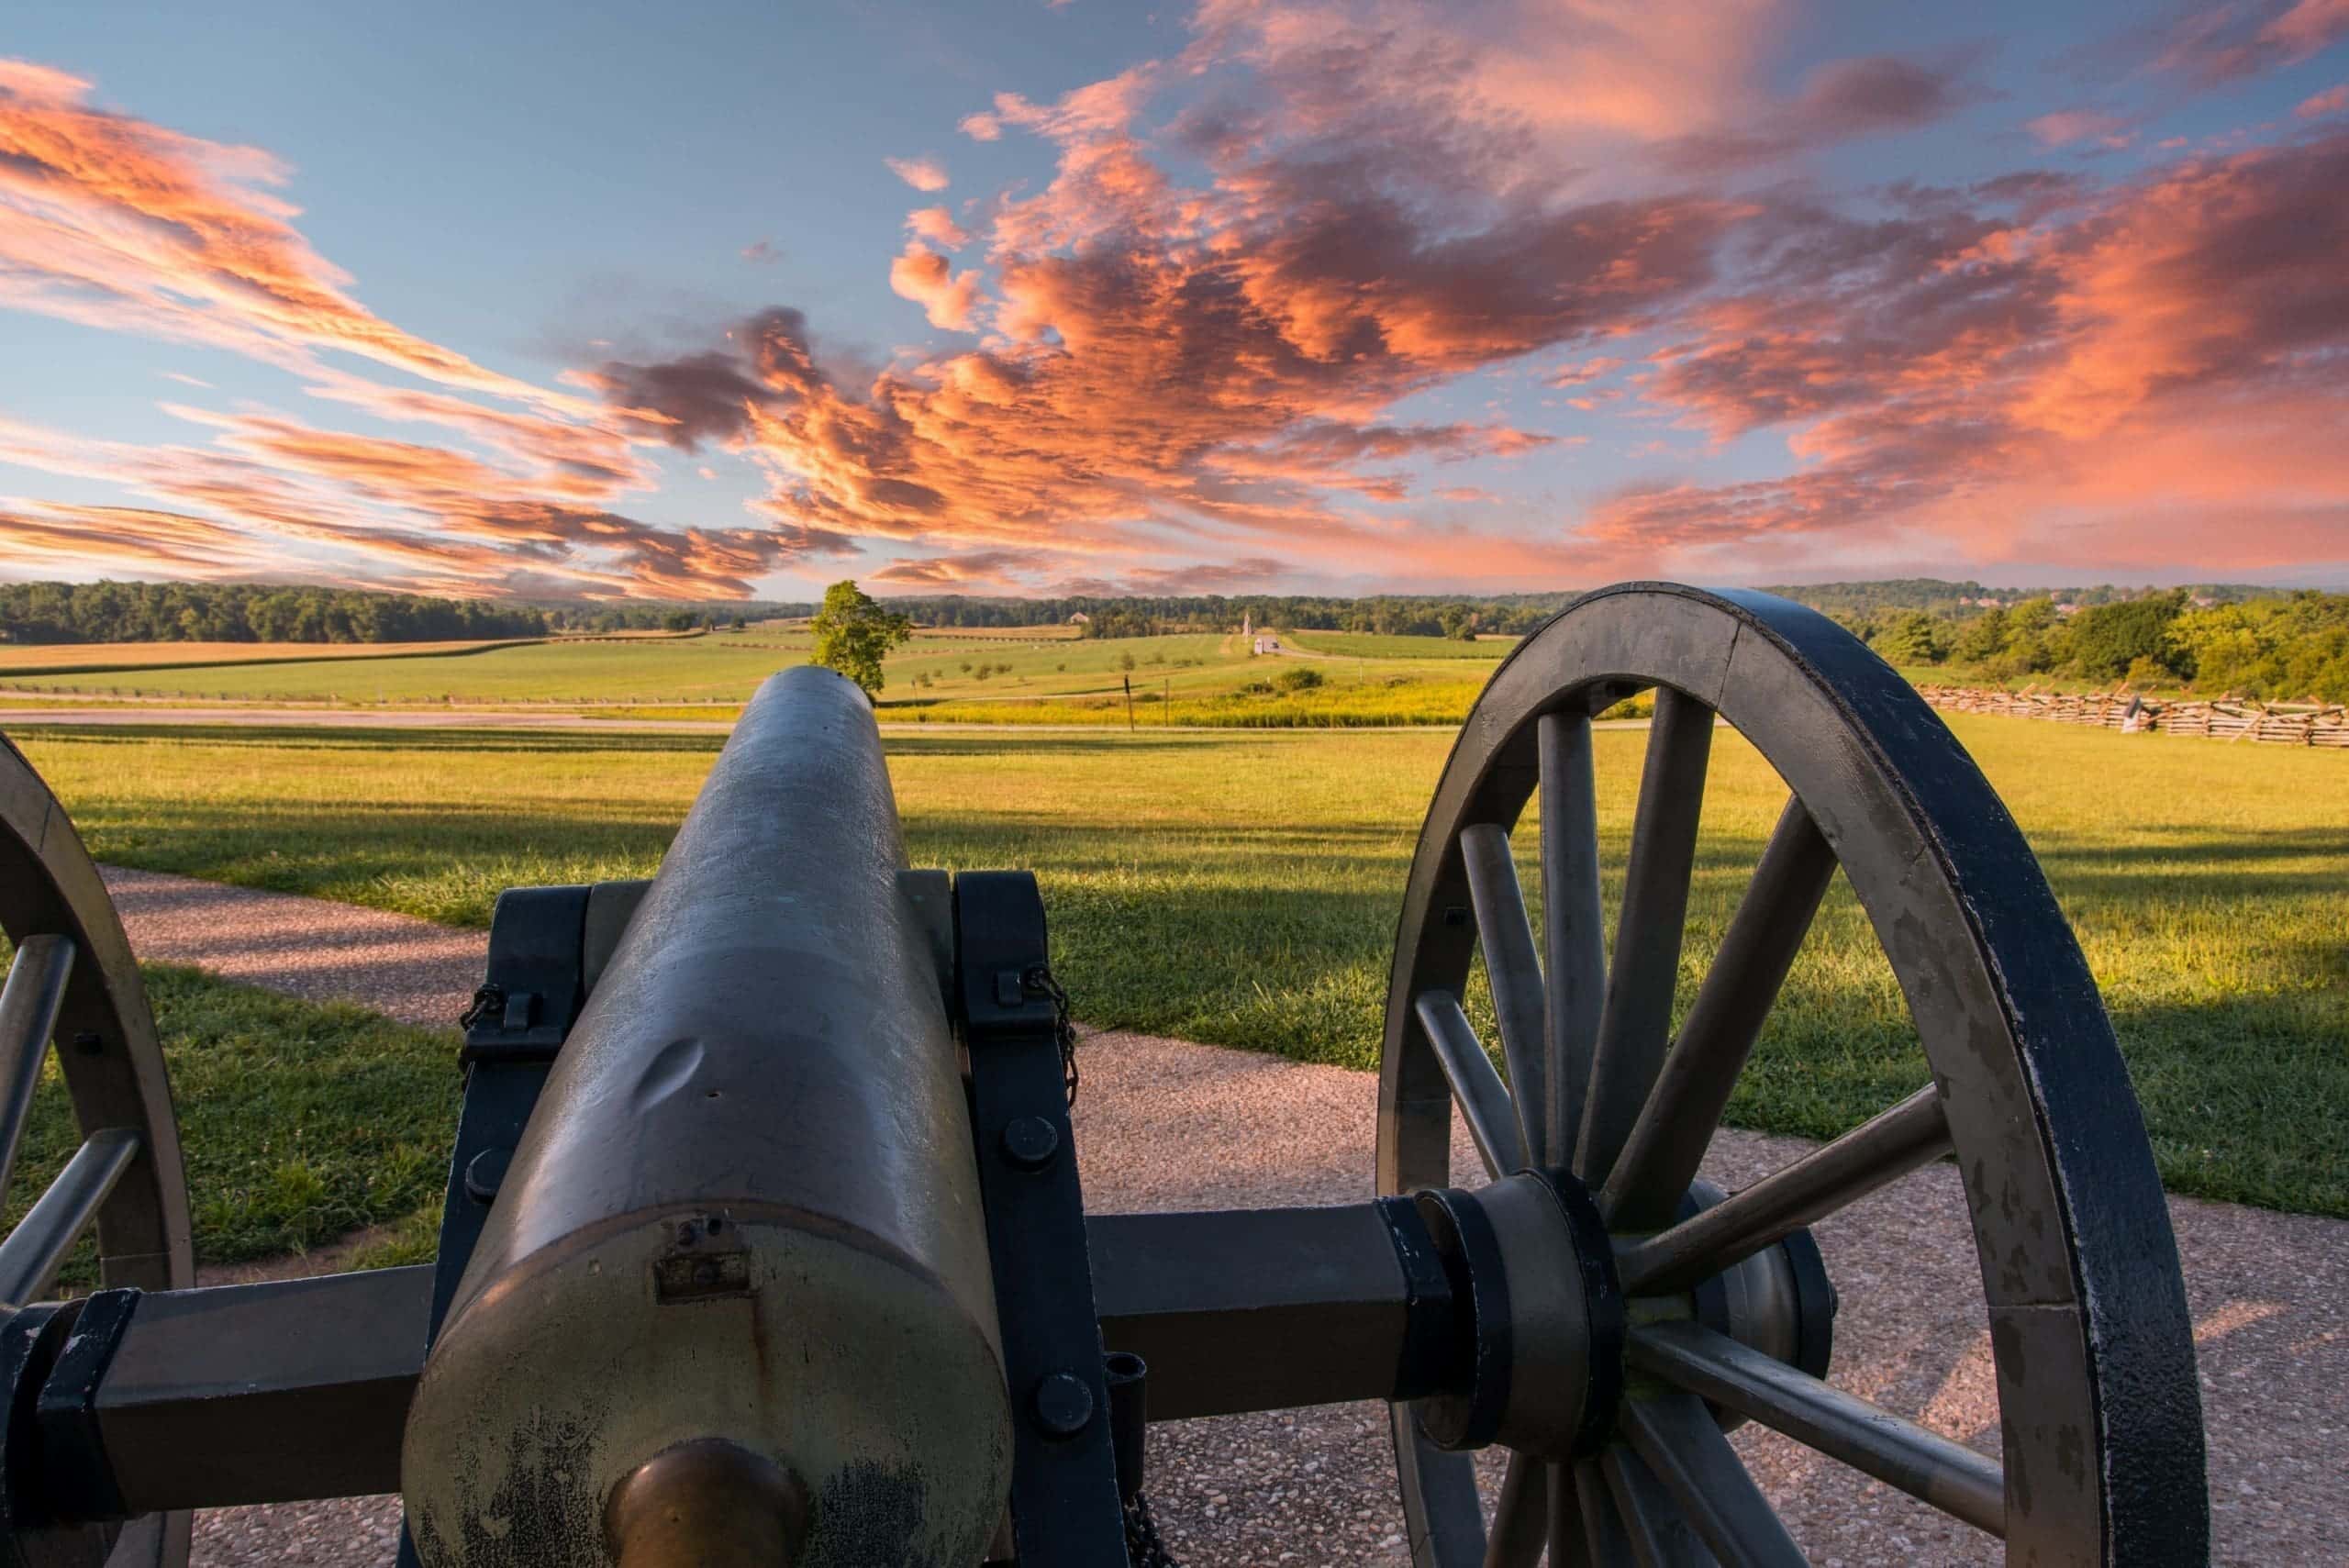 What is the best time of year to visit Gettysburg?